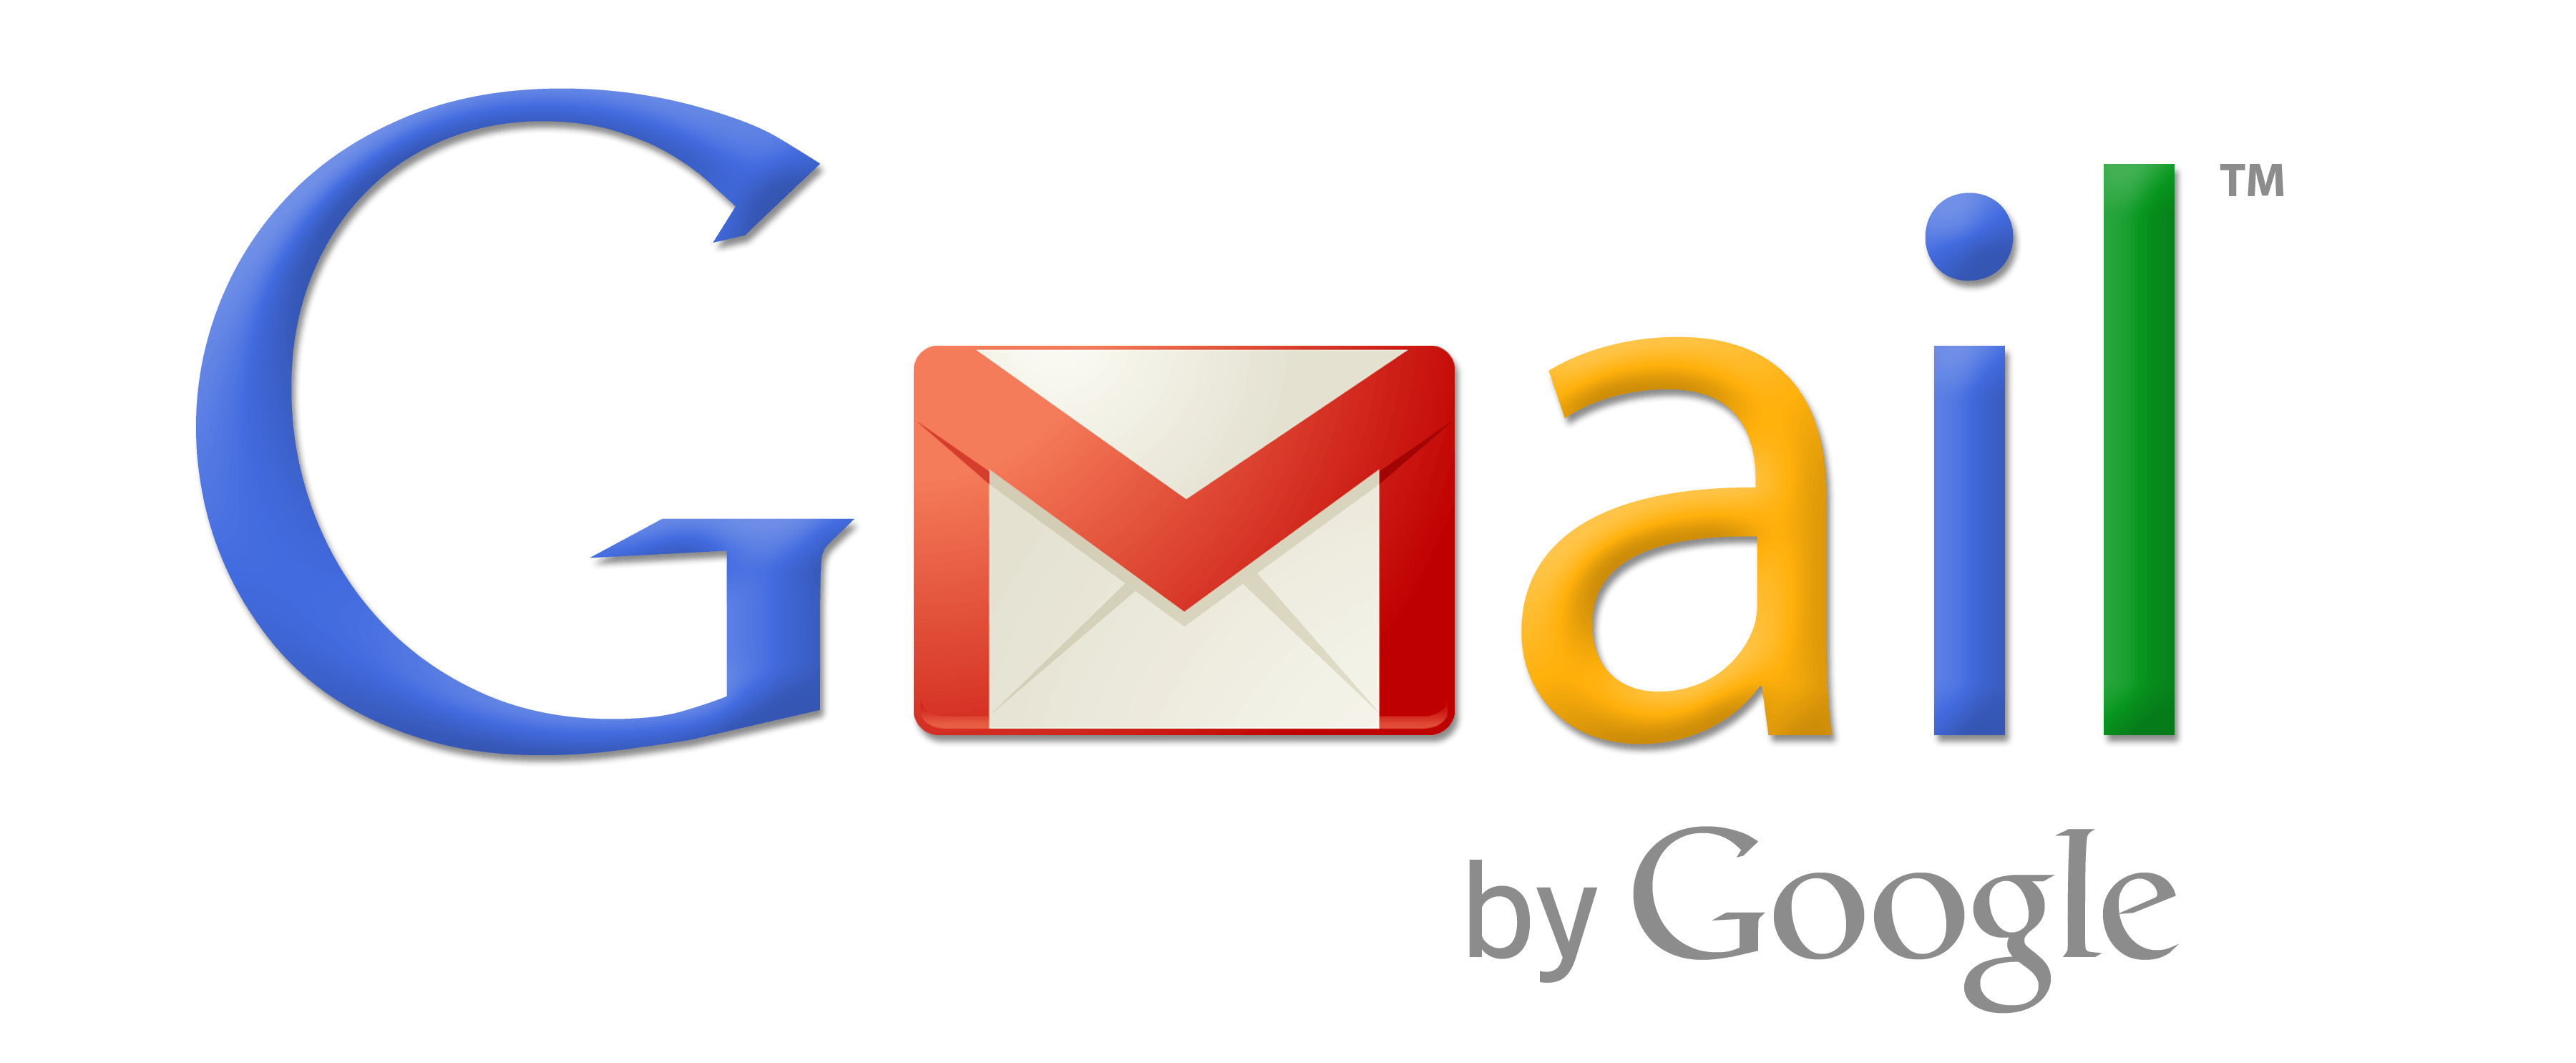 Gmail.com Logo - Gmail Signin - How to create Gmail Account